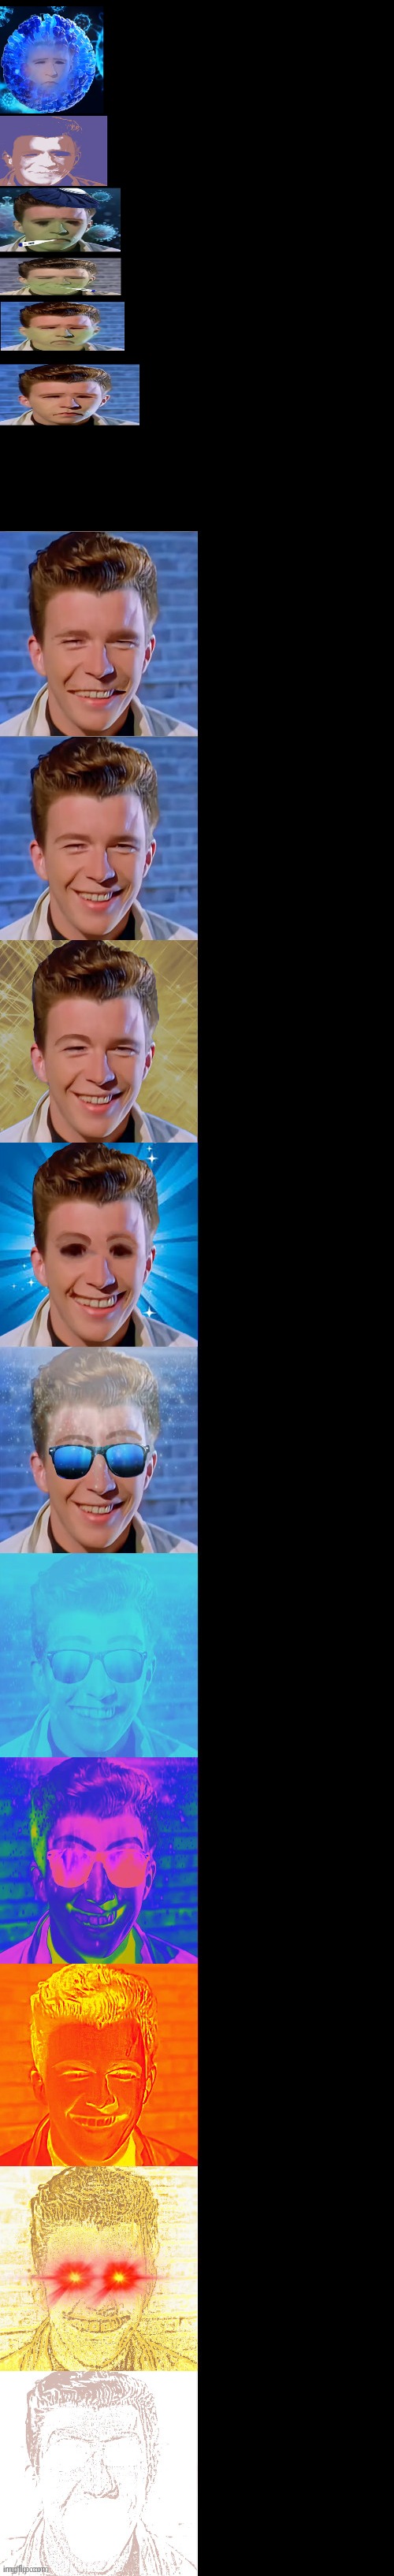 High Quality Rick Astley Becoming Sick To Canny Blank Meme Template